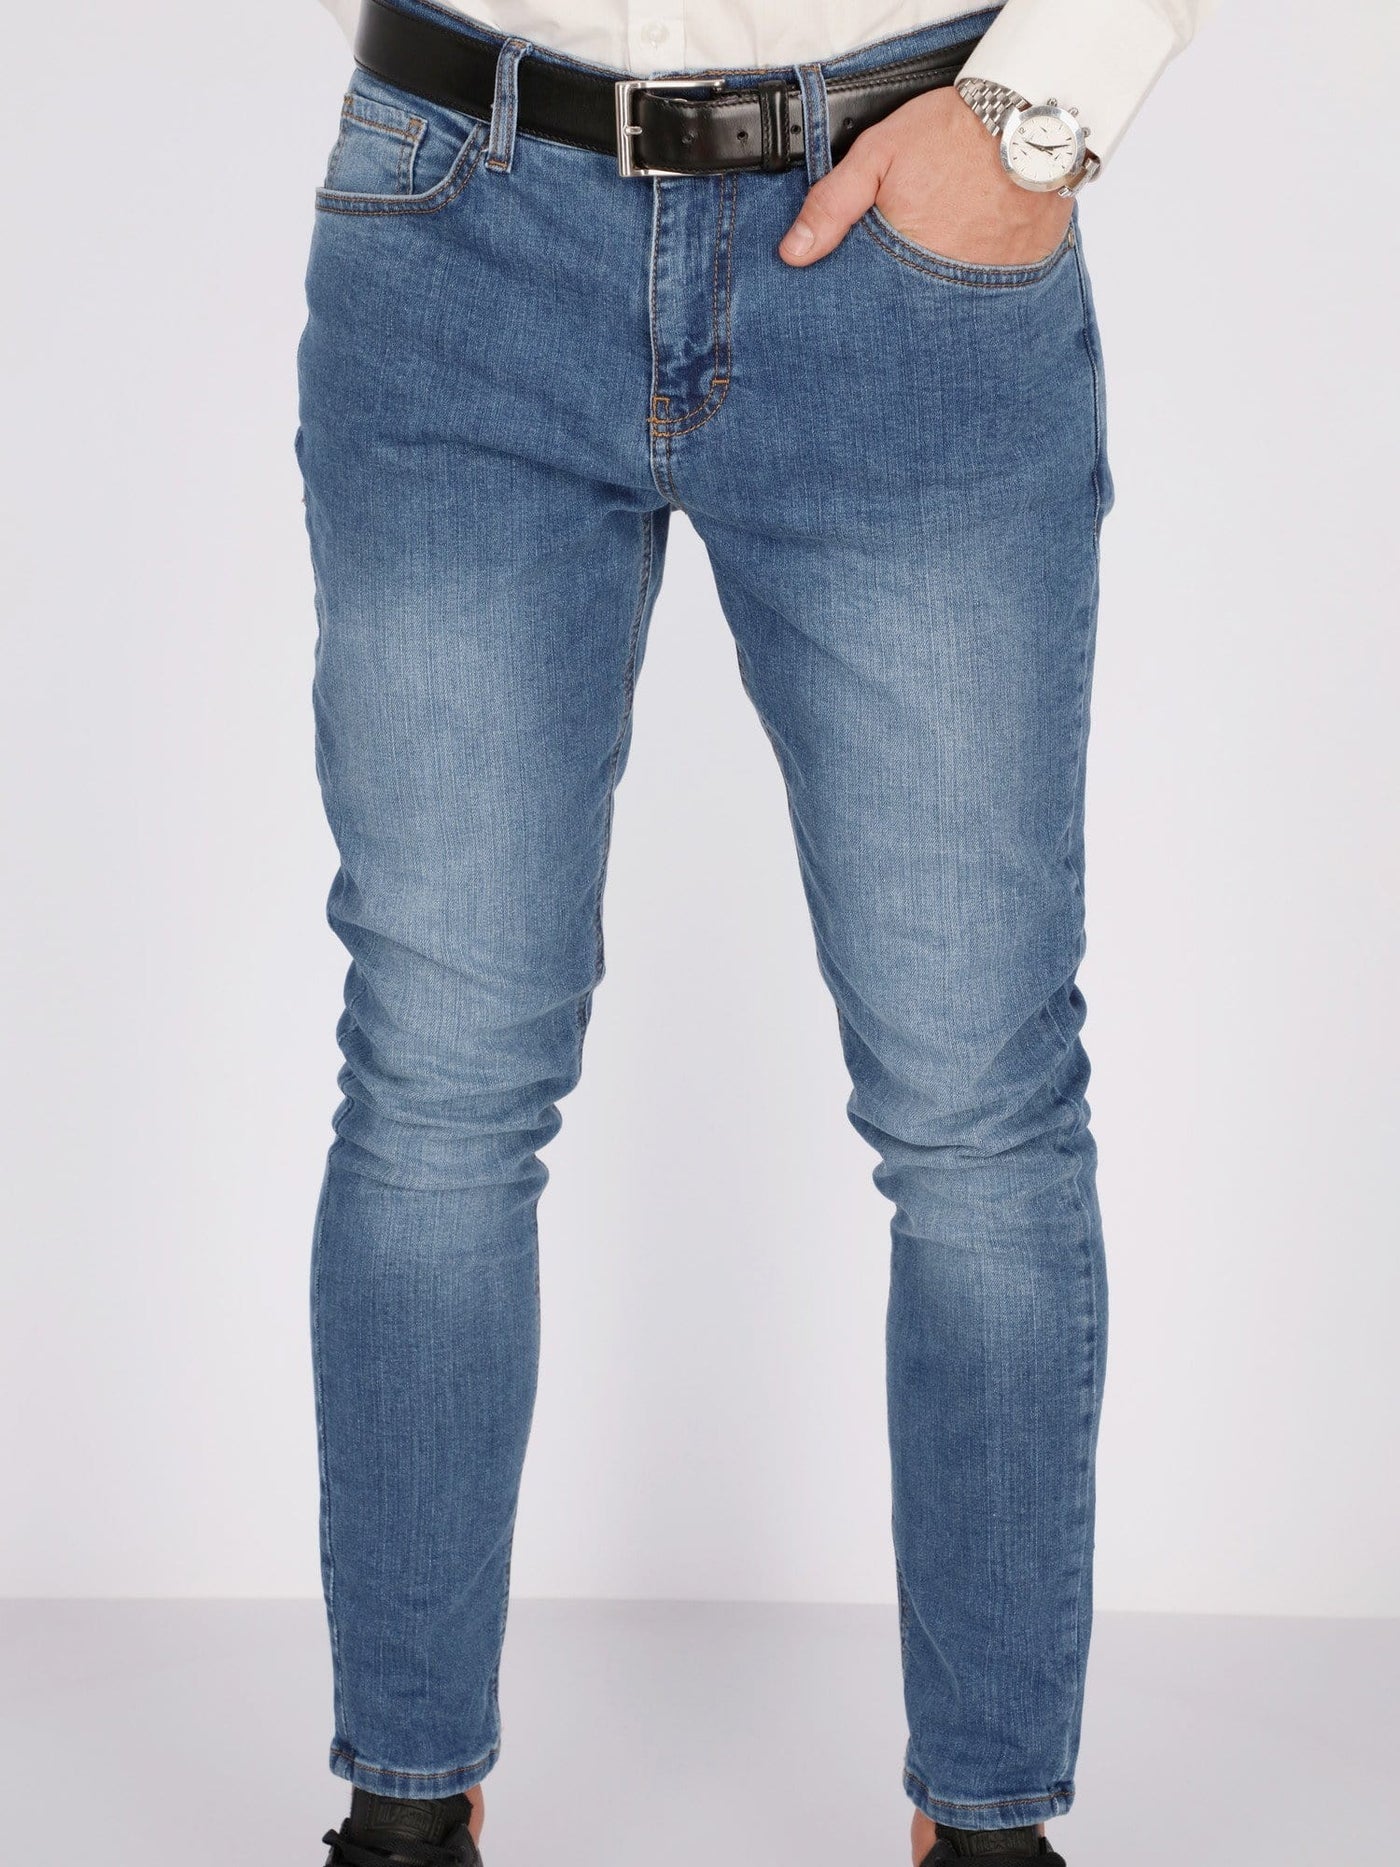 OR Pants & Shorts Wash Out Slim Fit Jeans